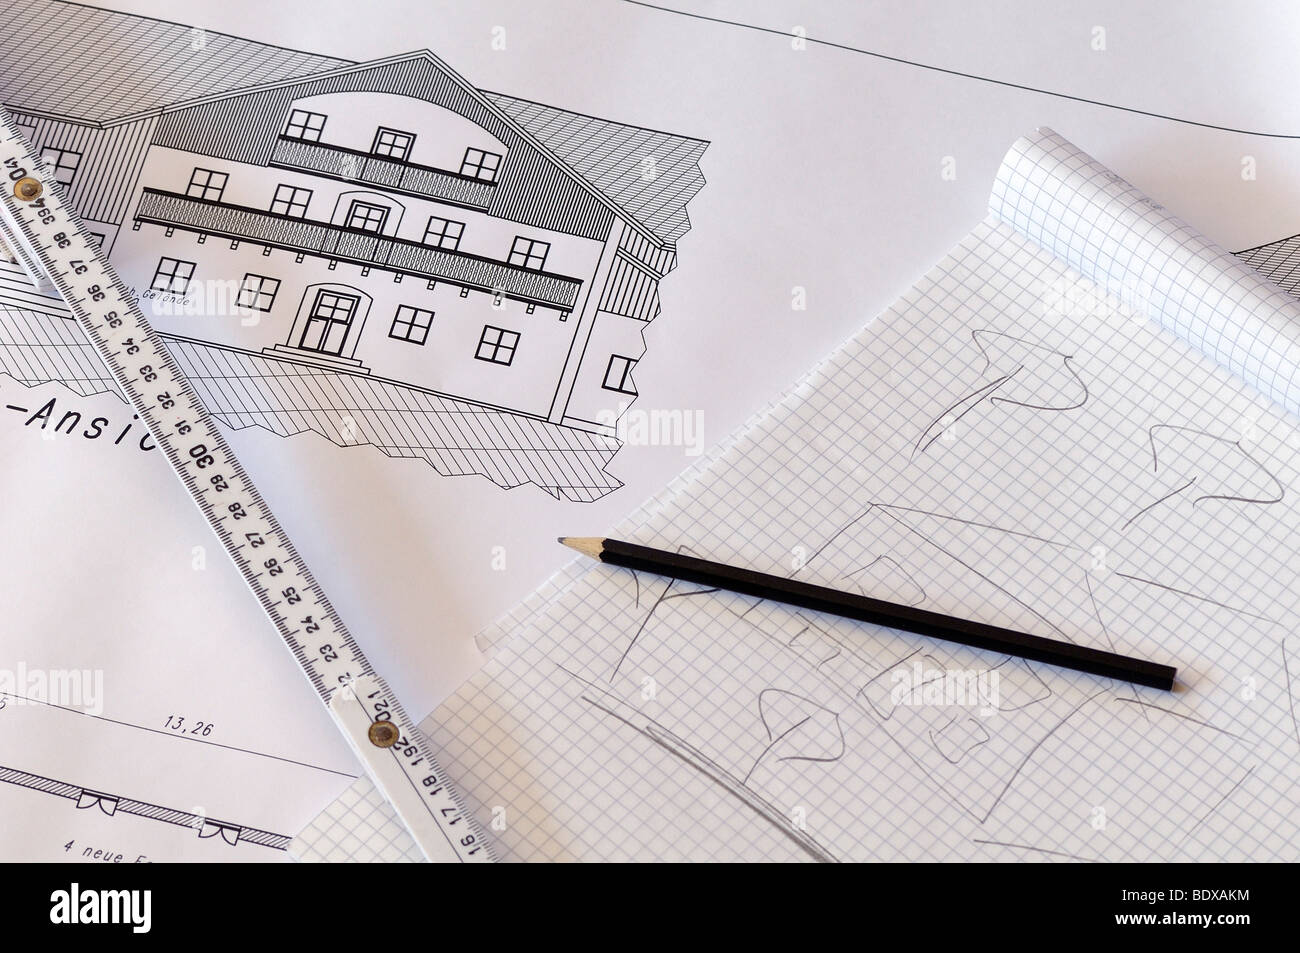 Architectural plan with ruler, pencil, block and sketch, detail Stock Photo